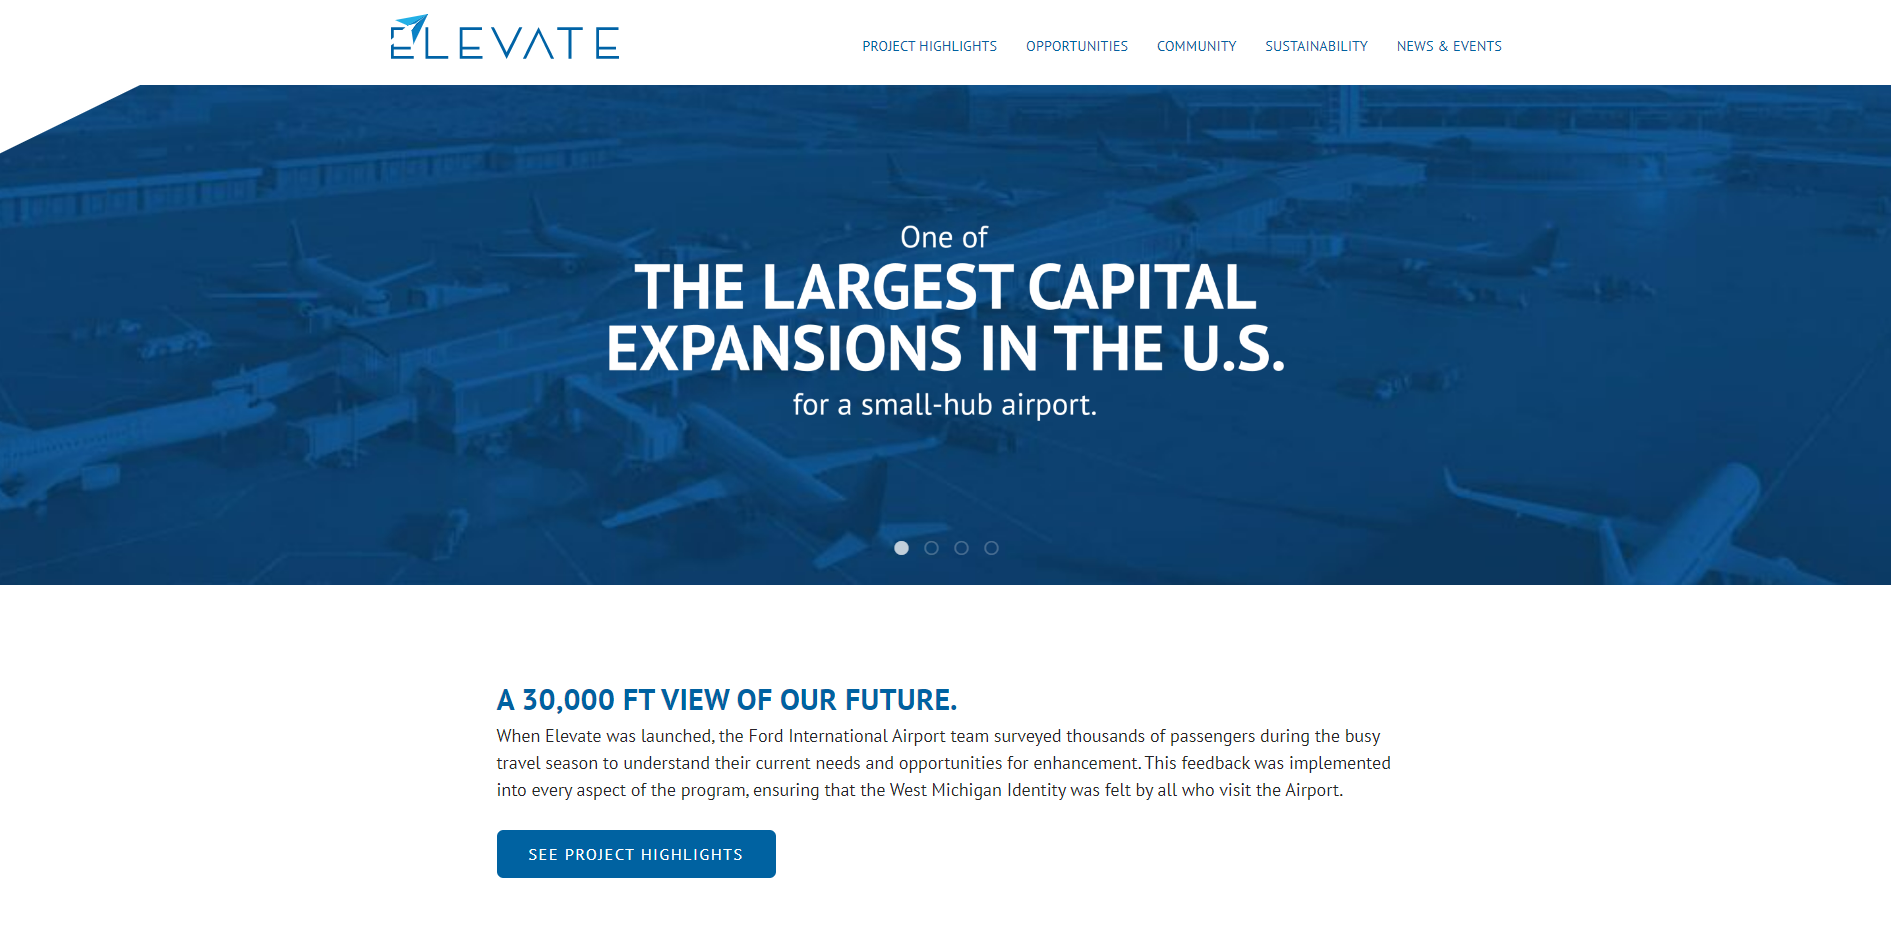 Ford International Airport Launches New Website to Showcase Multi-Million Dollar Capital Expansion Program, Elevate